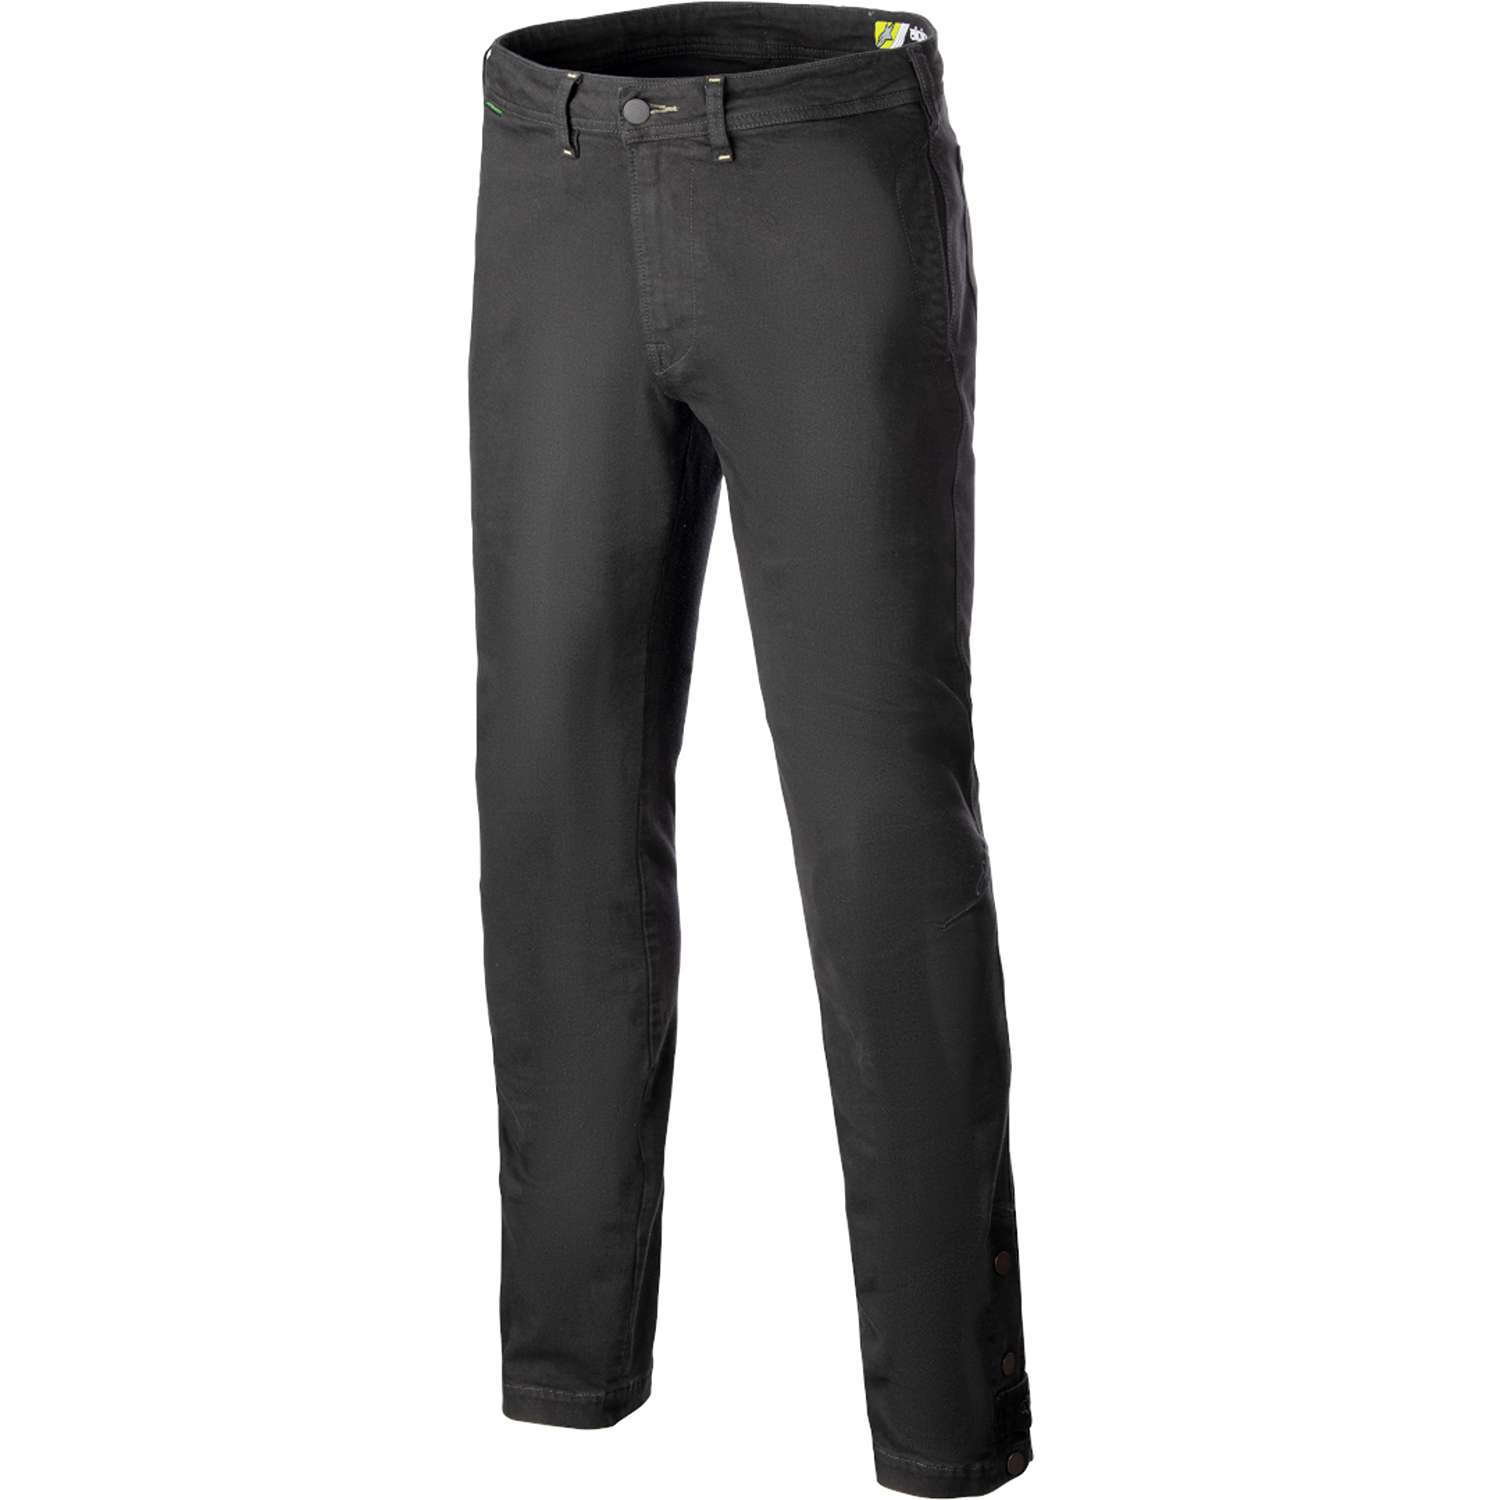 Image of Alpinestars Stratos Regular Fit Tech Riding Pants Anthracite Taille 28